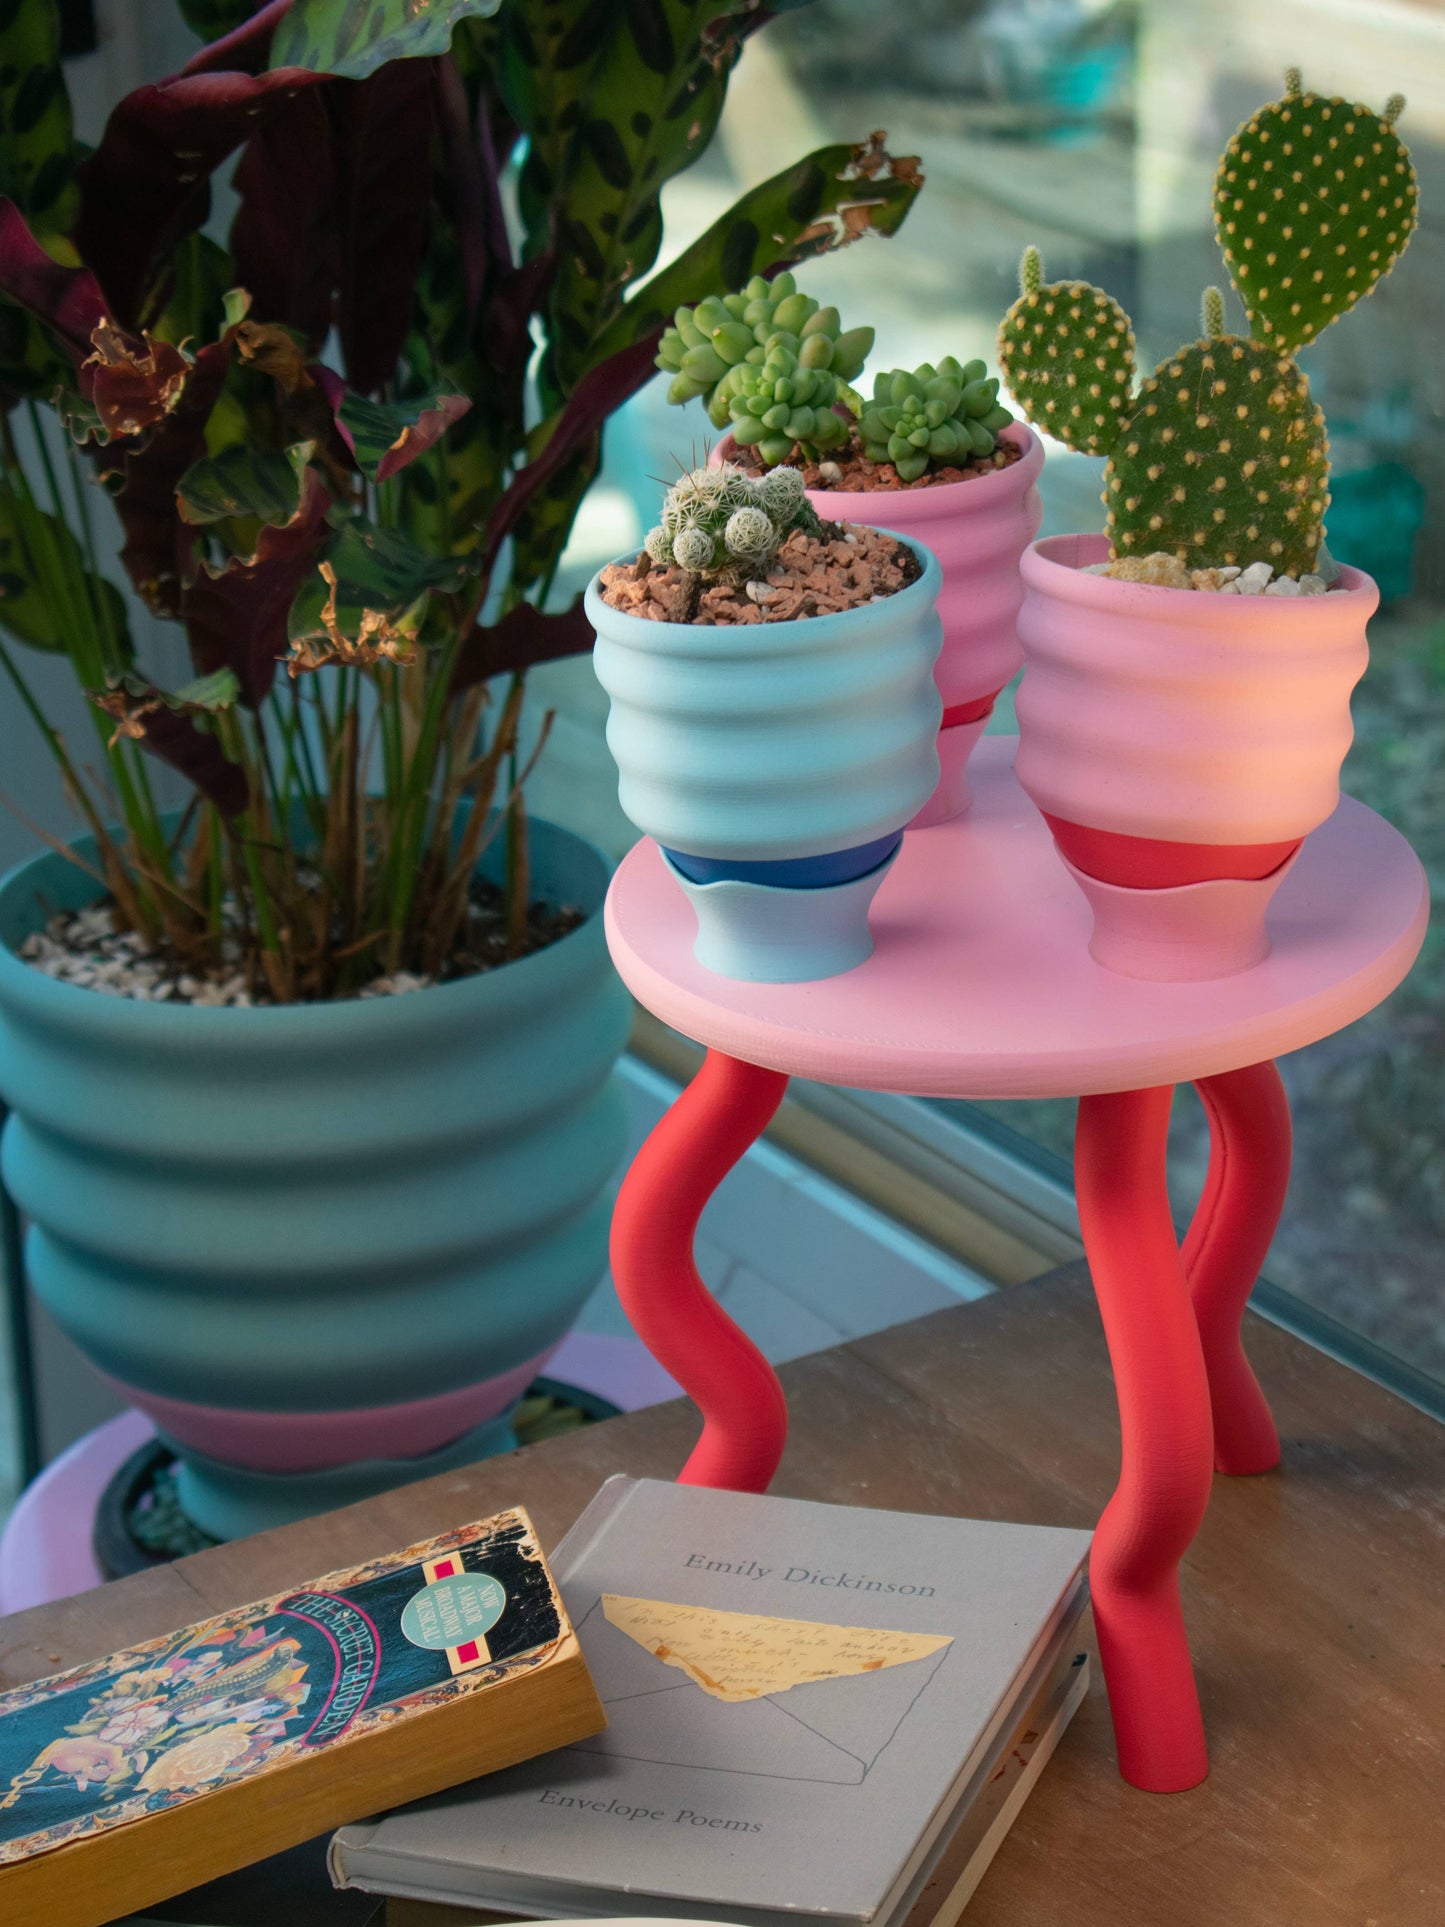 Wavy Plant Stand (3 colorways): Swimming Pool Blues